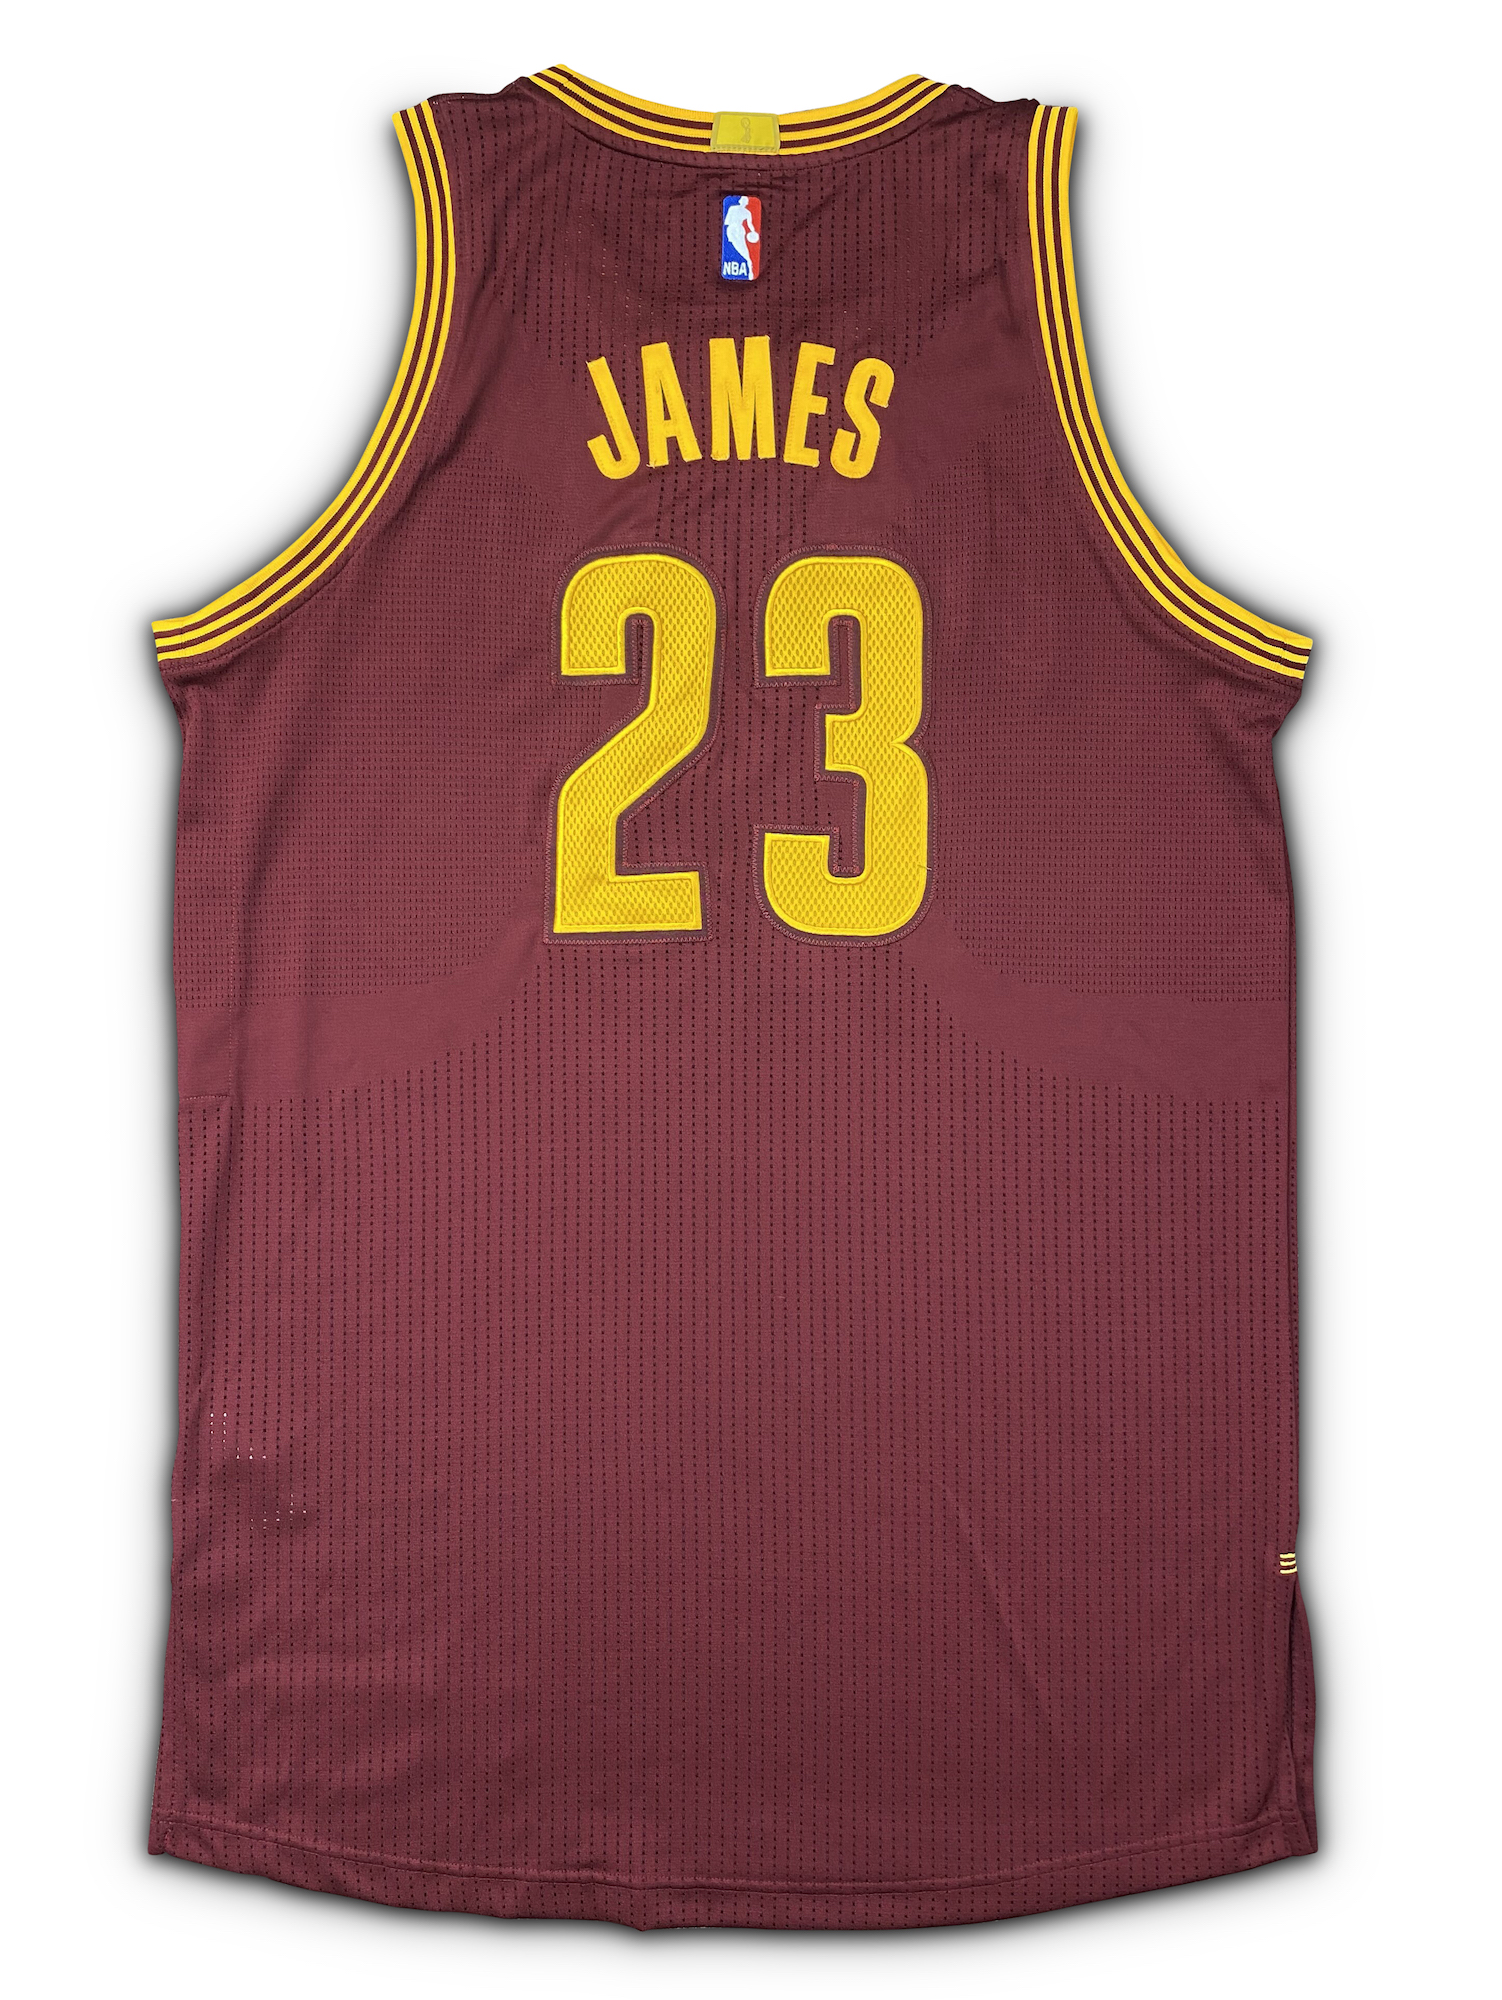 2016 LeBron James Game Worn Jersey - Photomatched (1 Game) –